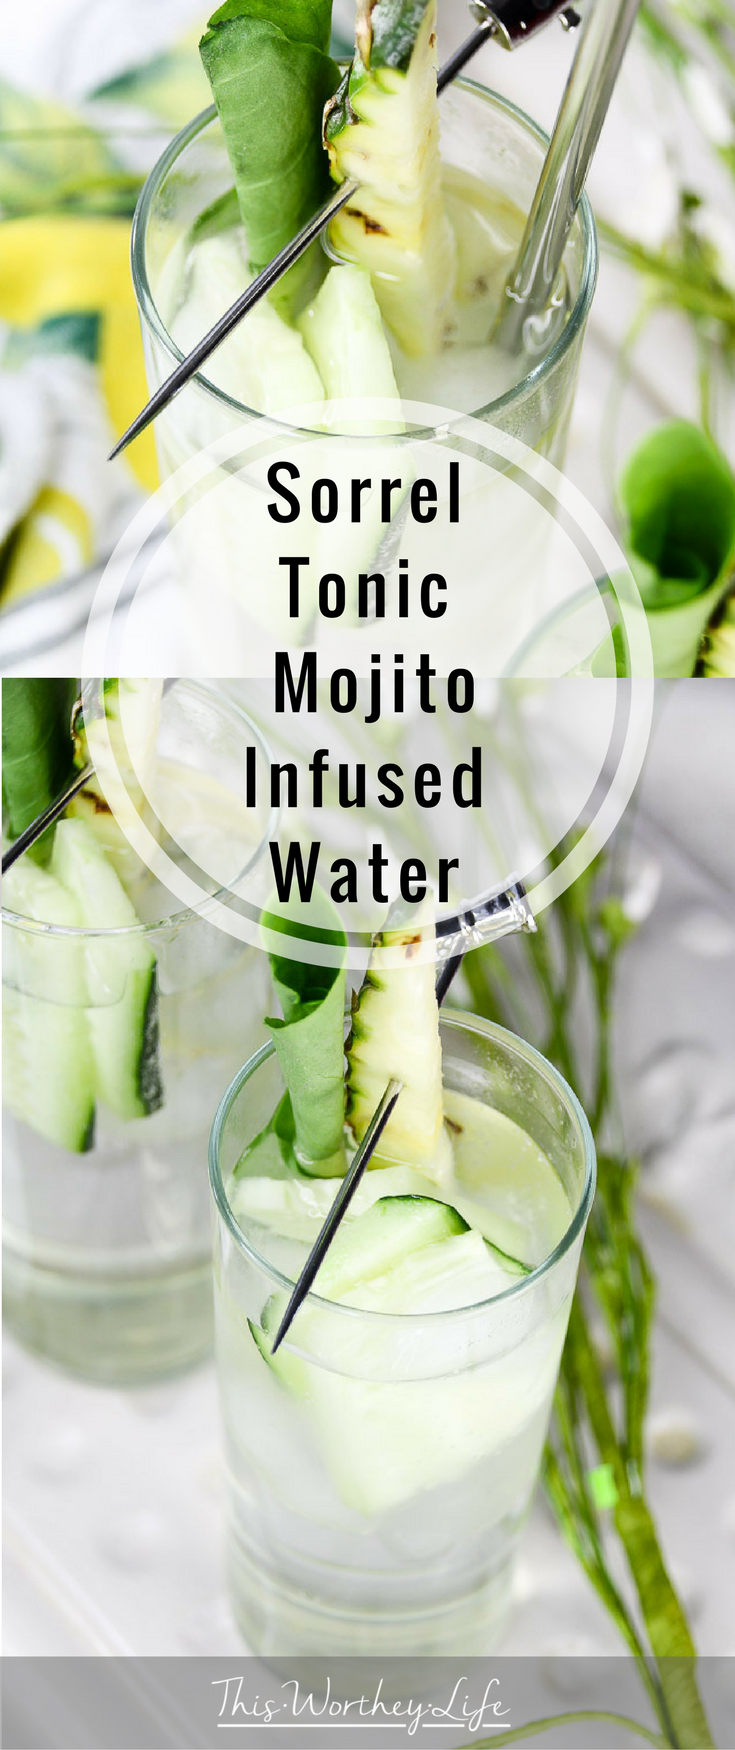 Cool off with this refreshing infused water drink! It's made with a sorrel simple syrup, tonic water, fresh cucumbers, and pineapple.  Our Sorrel Tonic Mojito Infused Water will be one drink you'll want to have again and again during the warmer weather.